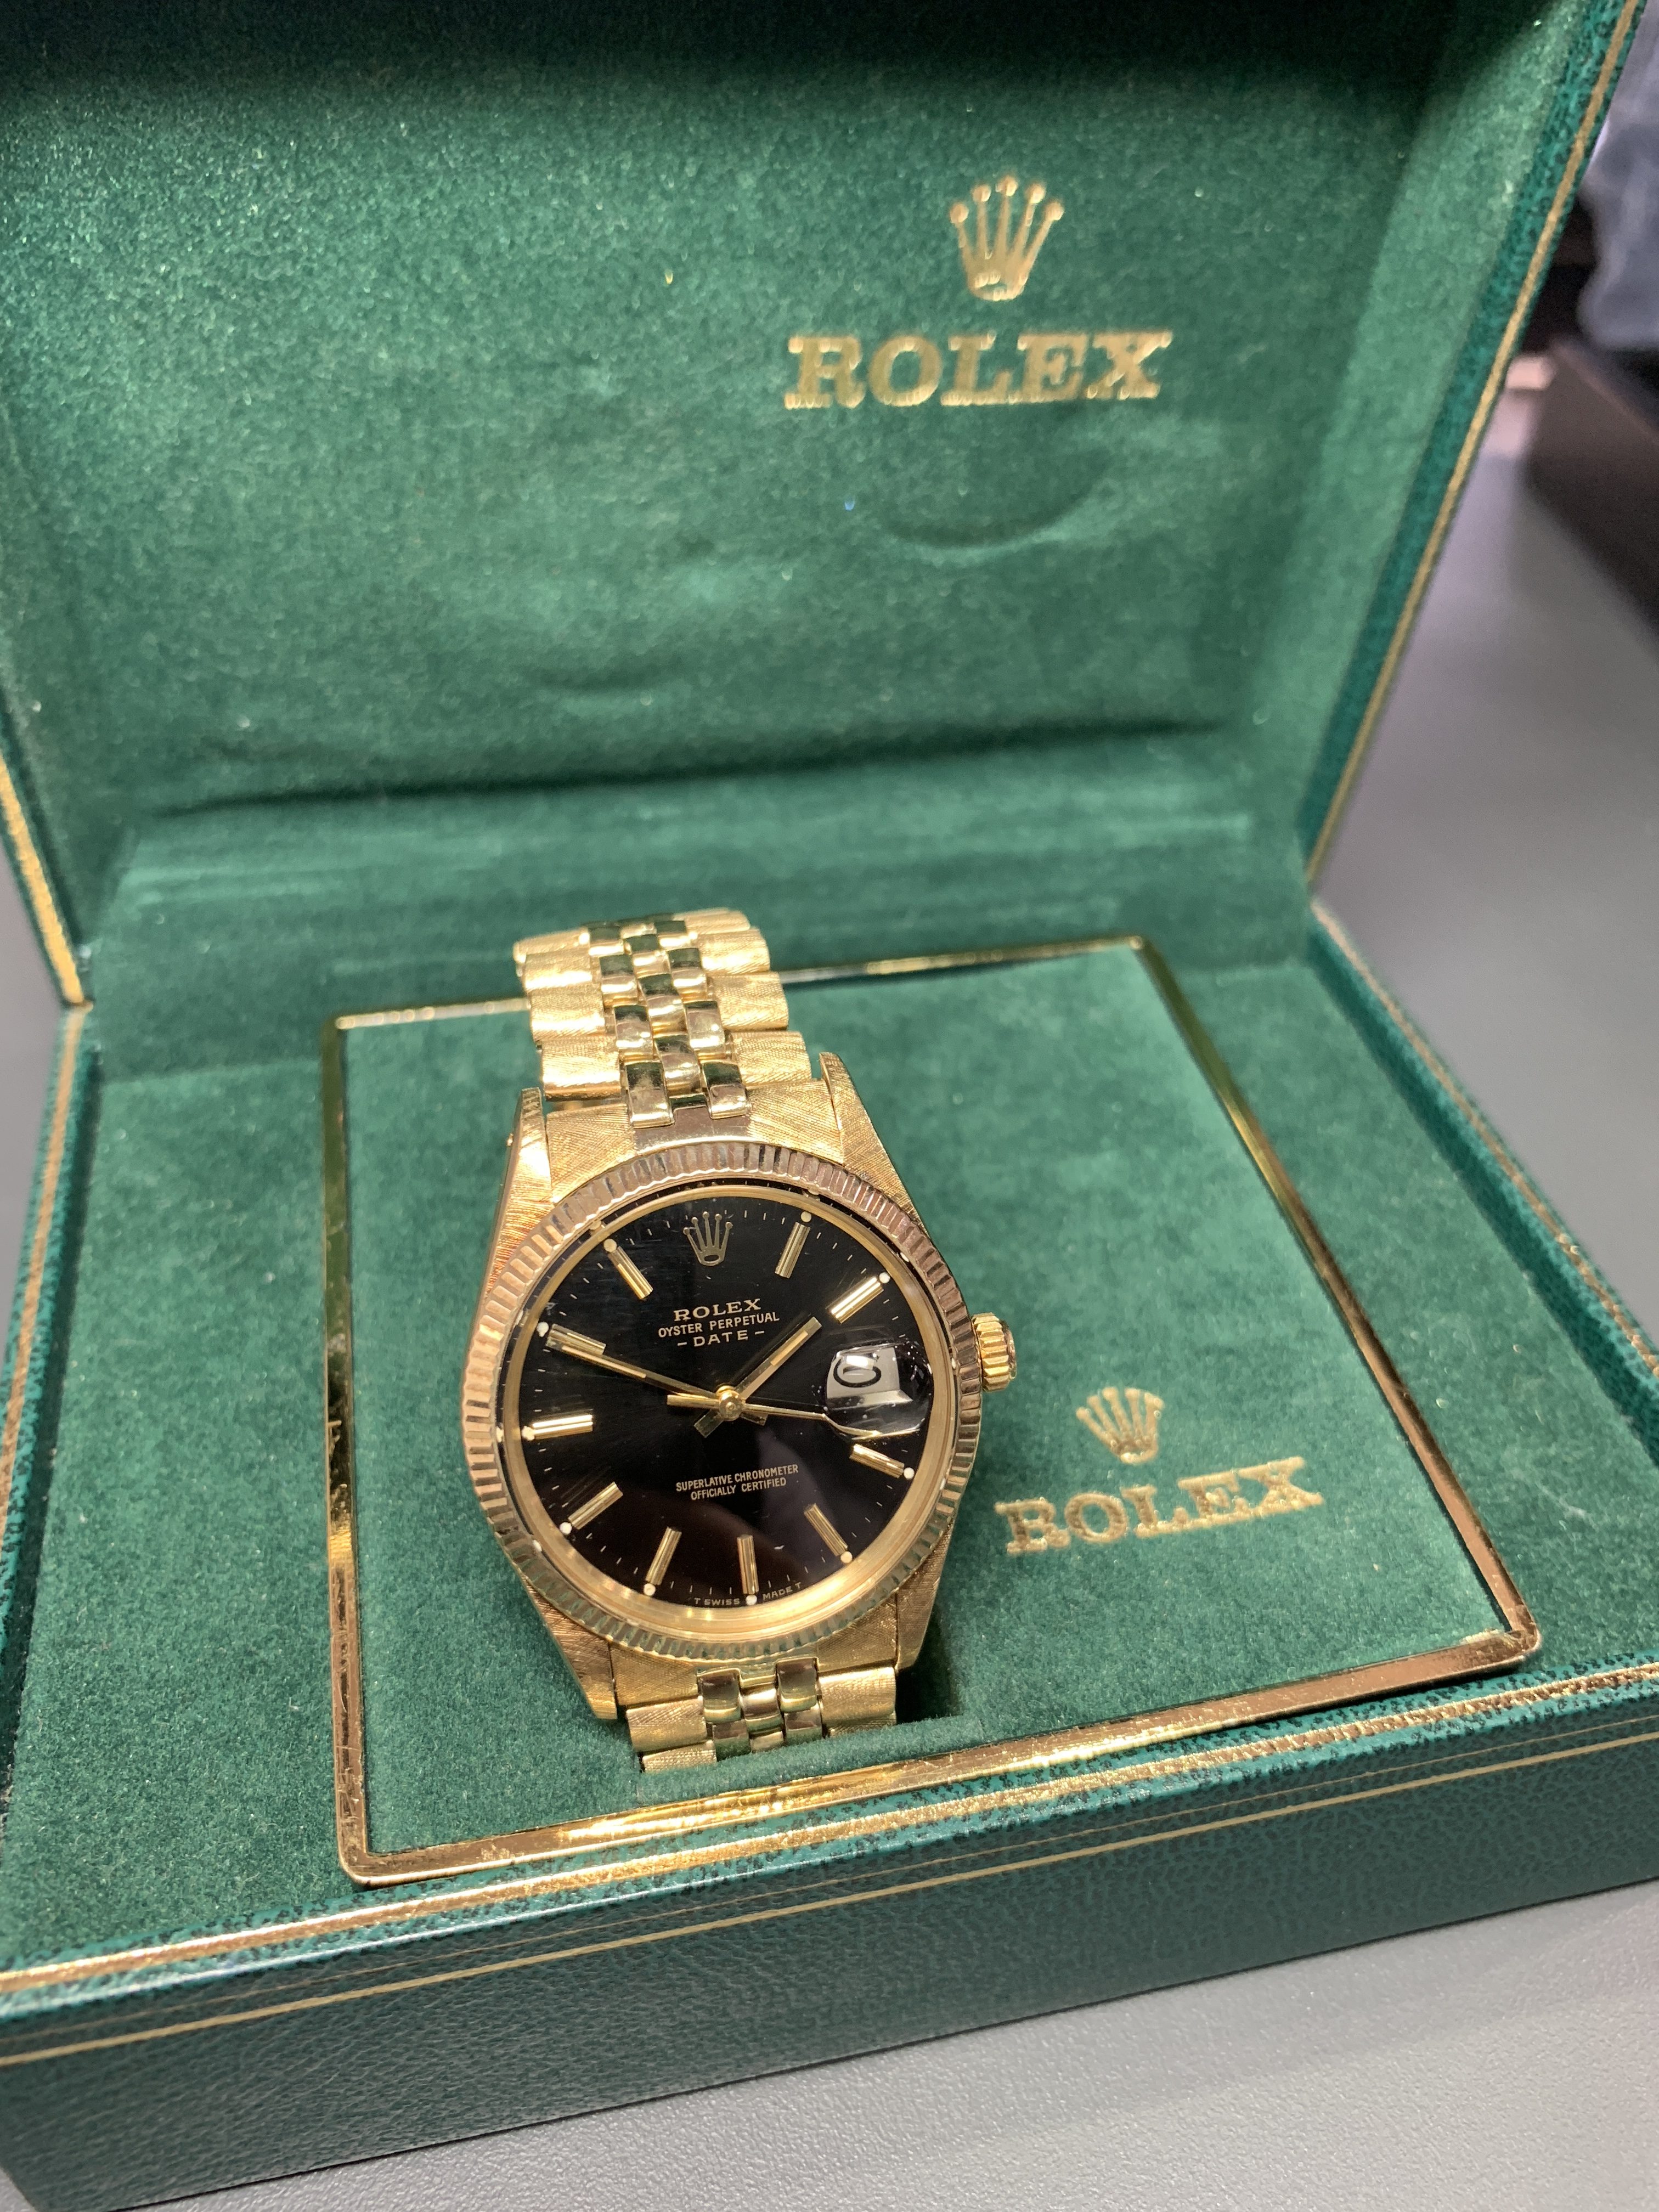 Vintage Rolex Gold oyster perpetual date model from 1981 Carr